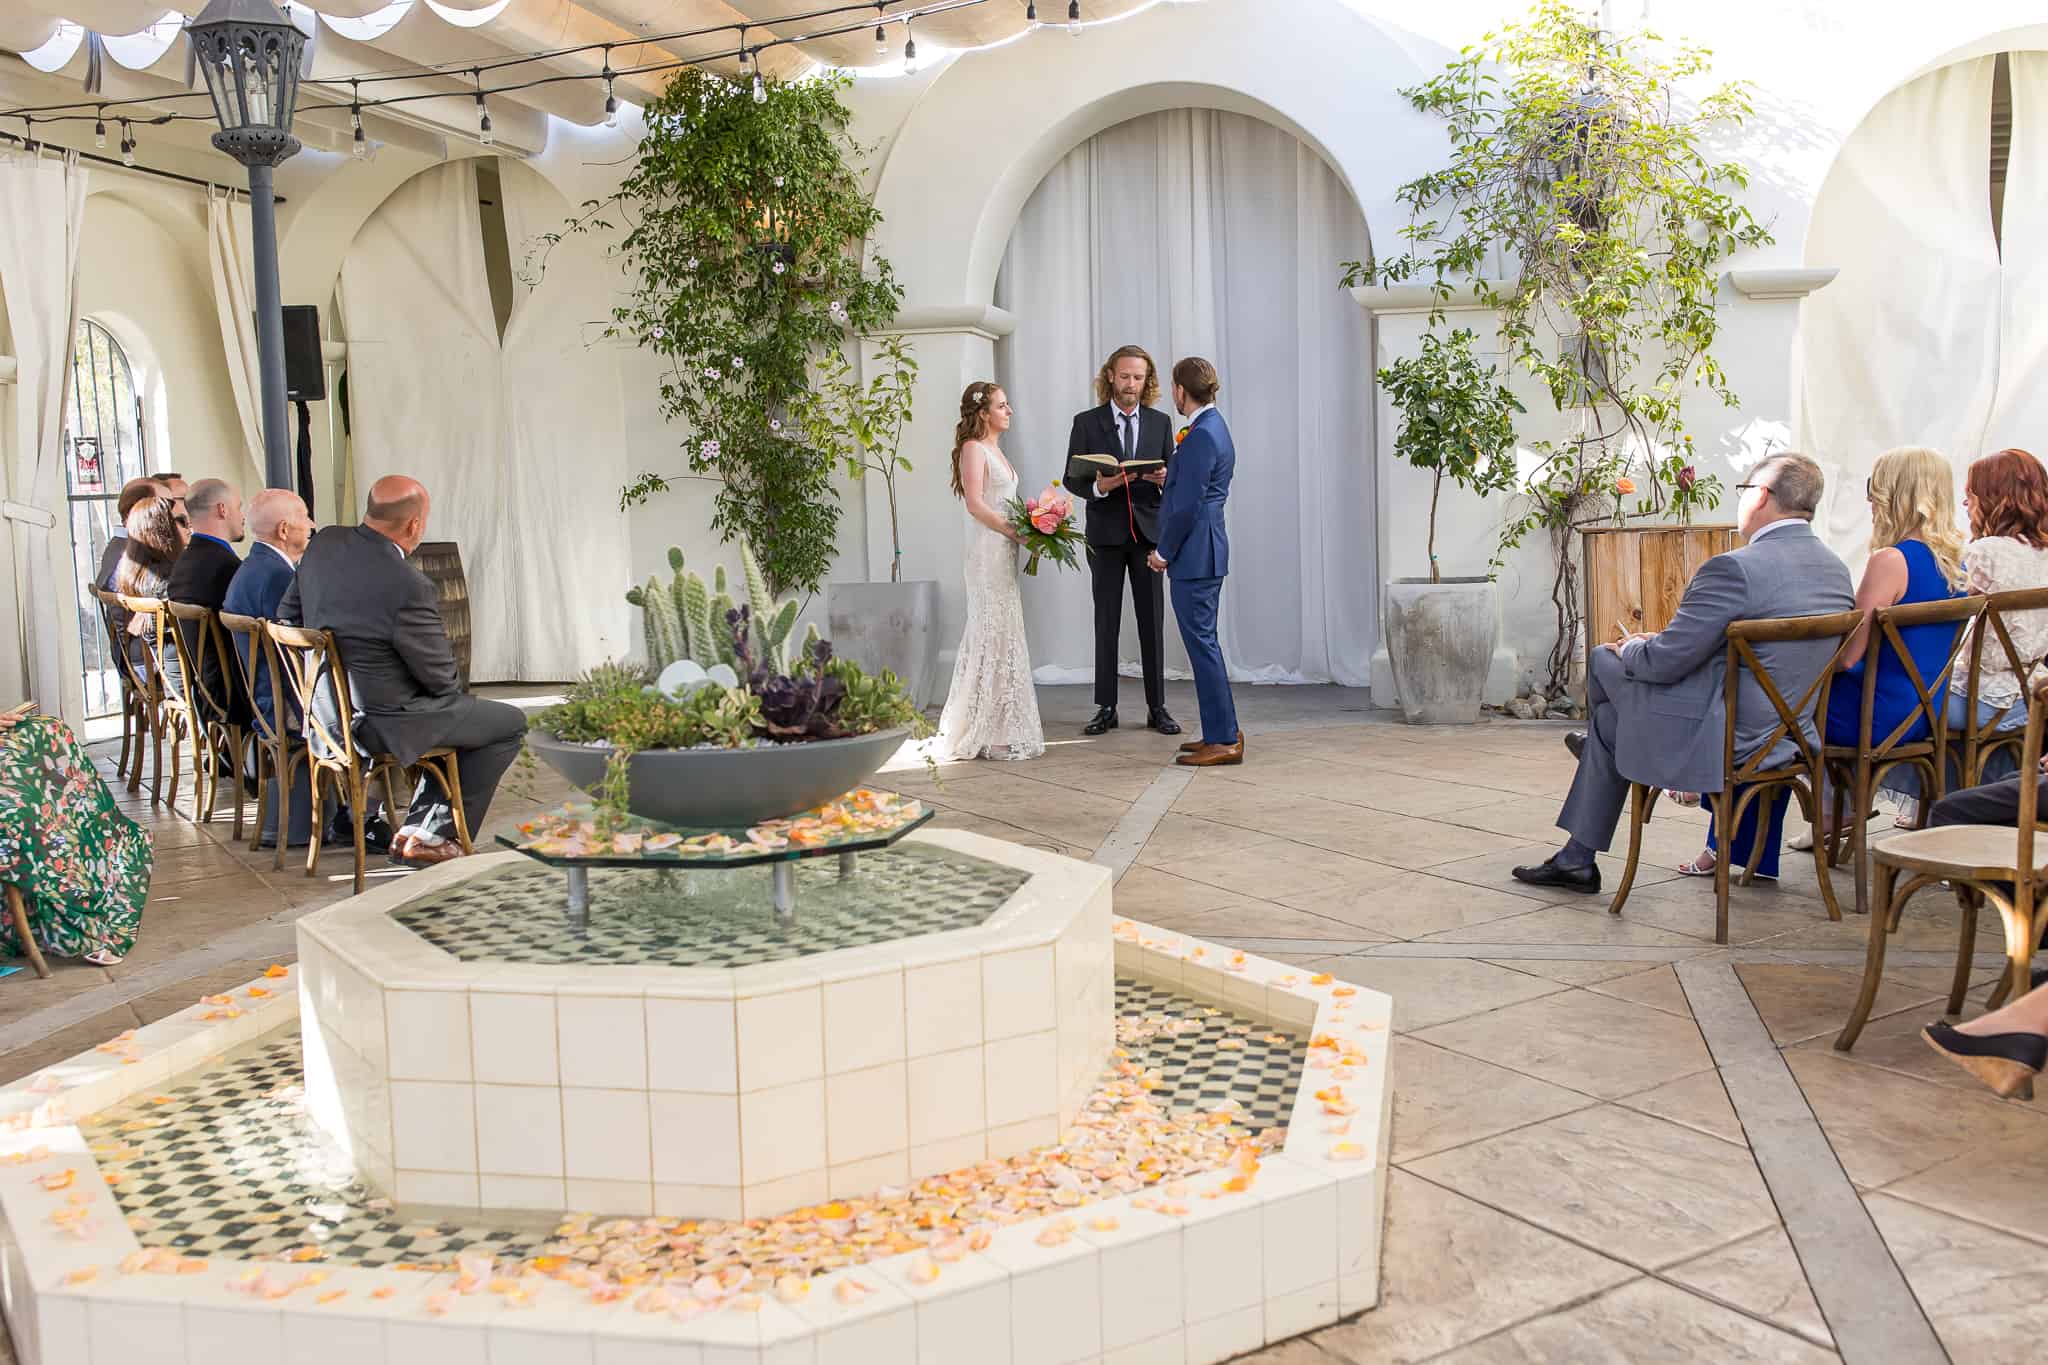 Couple getting married at villa and vine after learning How to Have an Intimate Micro Wedding in Santa Barbara